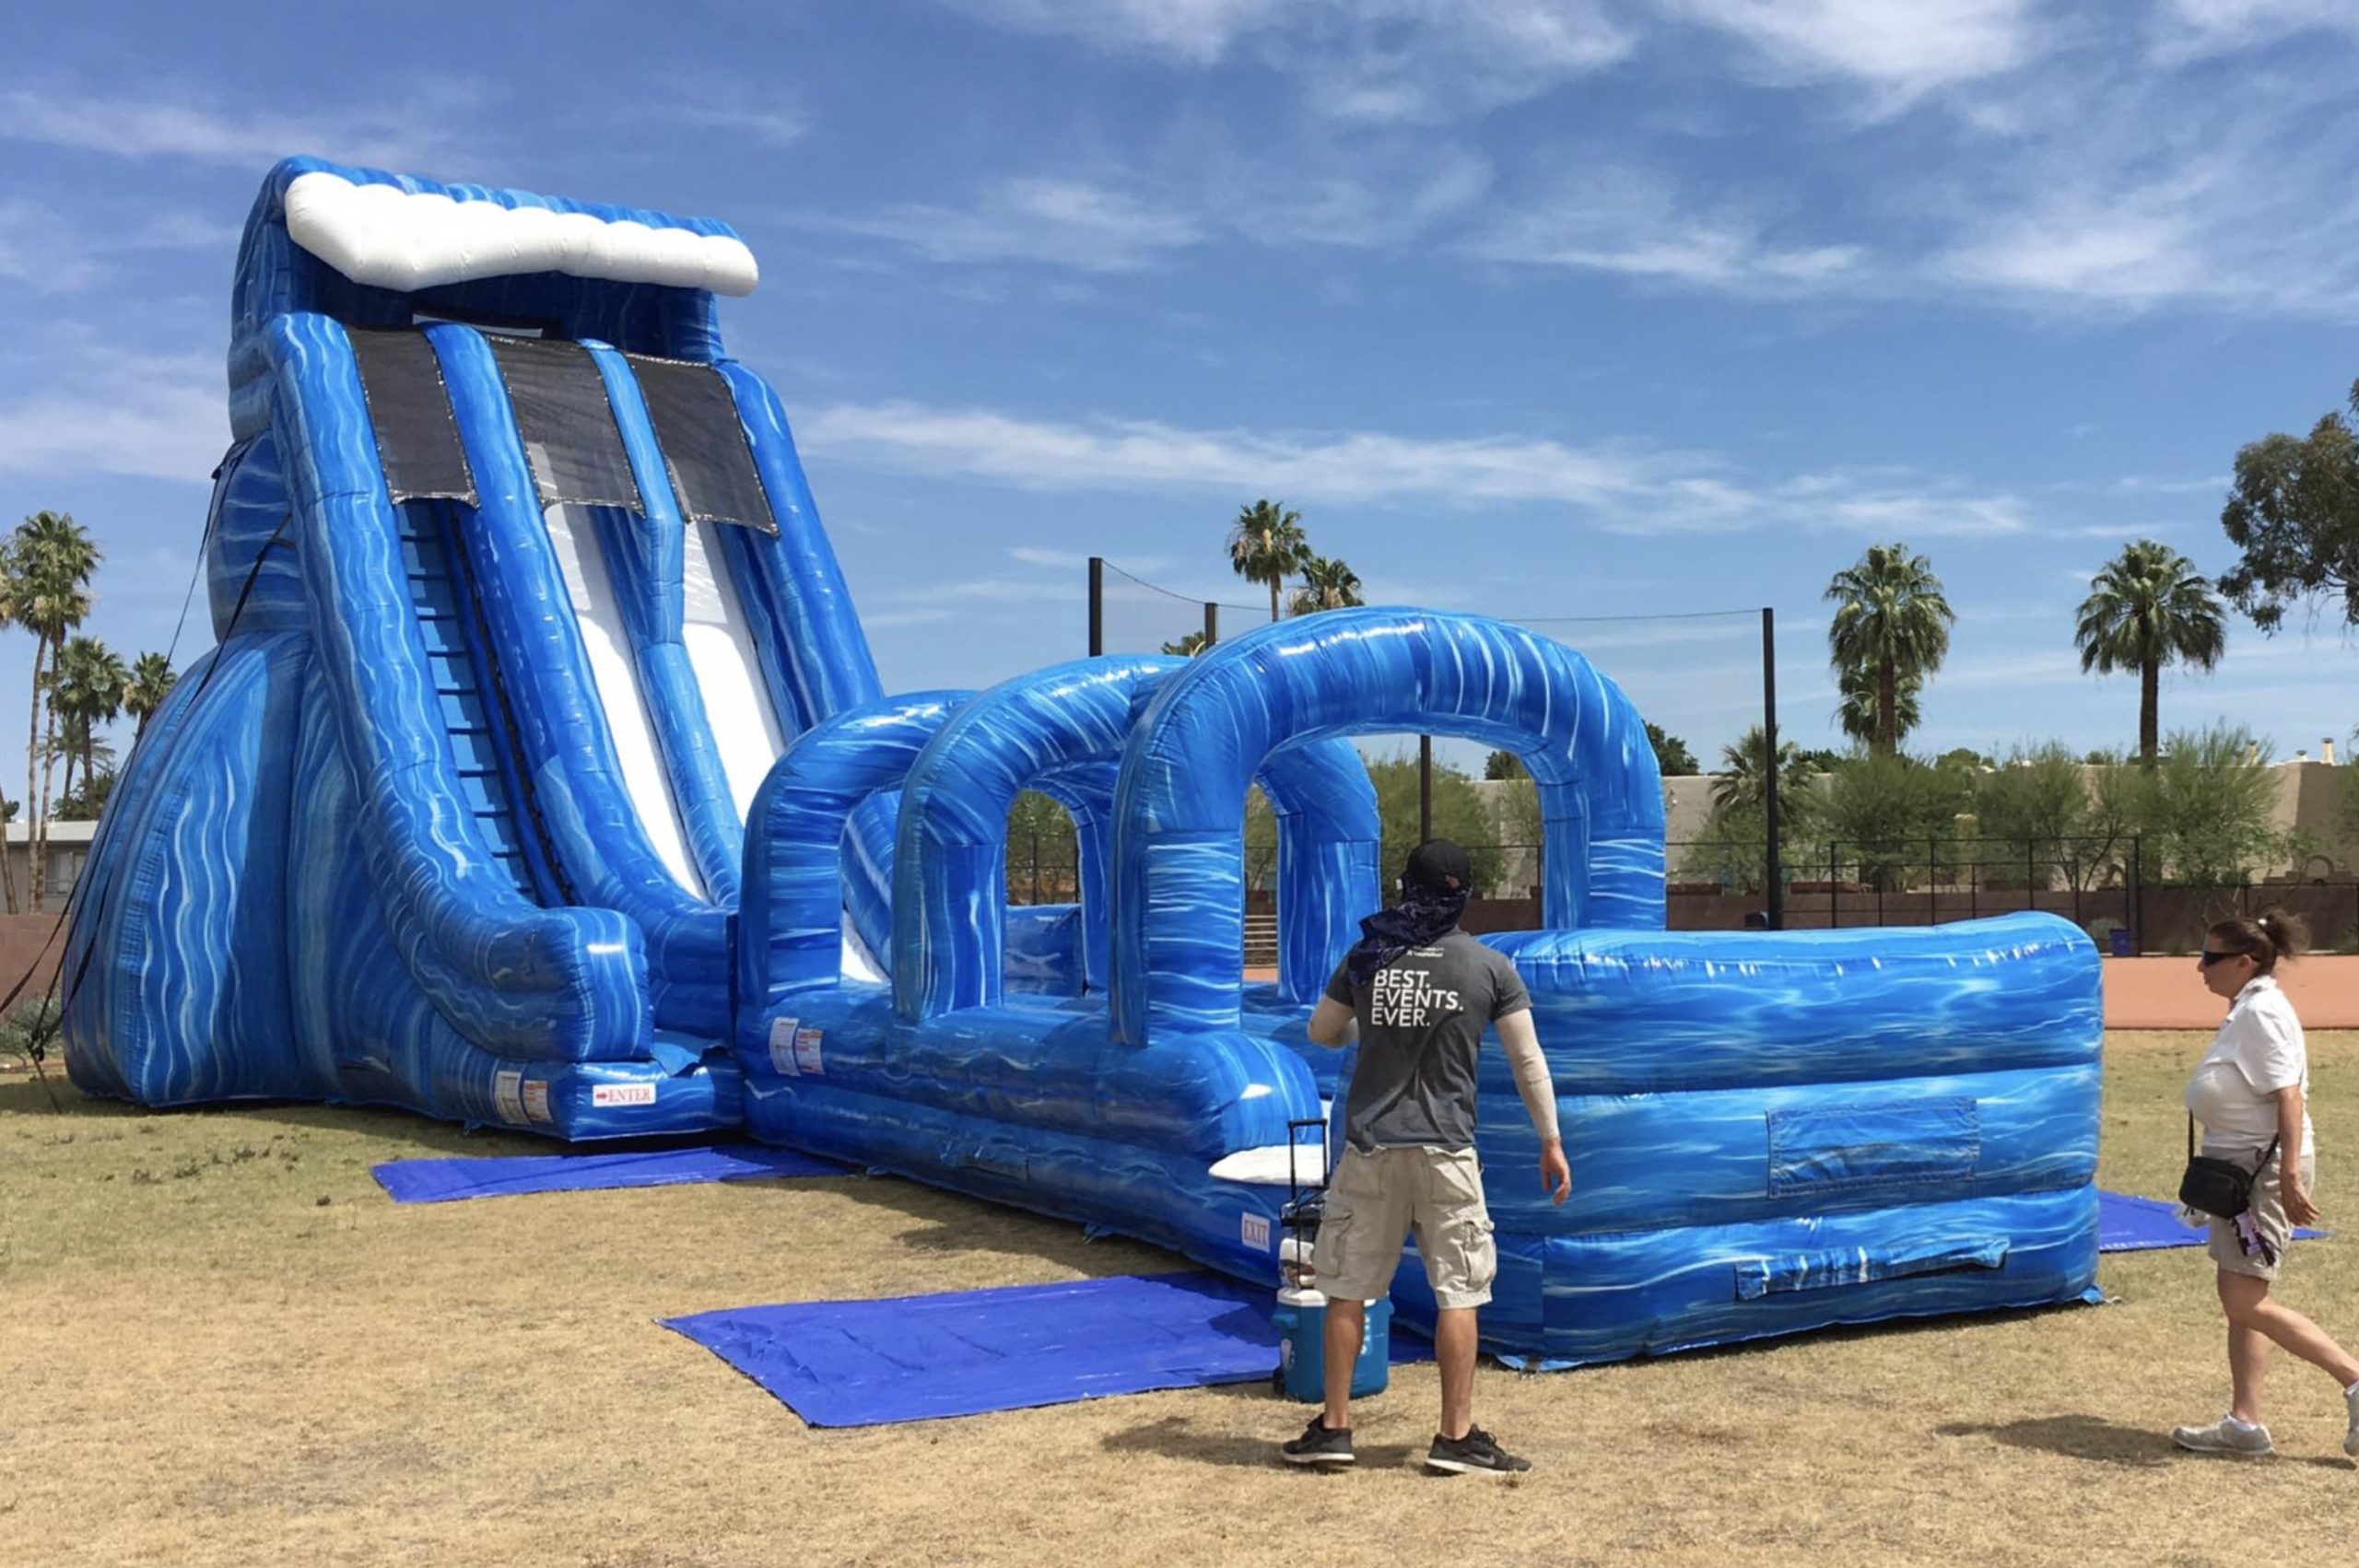 this image shows water slide in Carmichael, CA